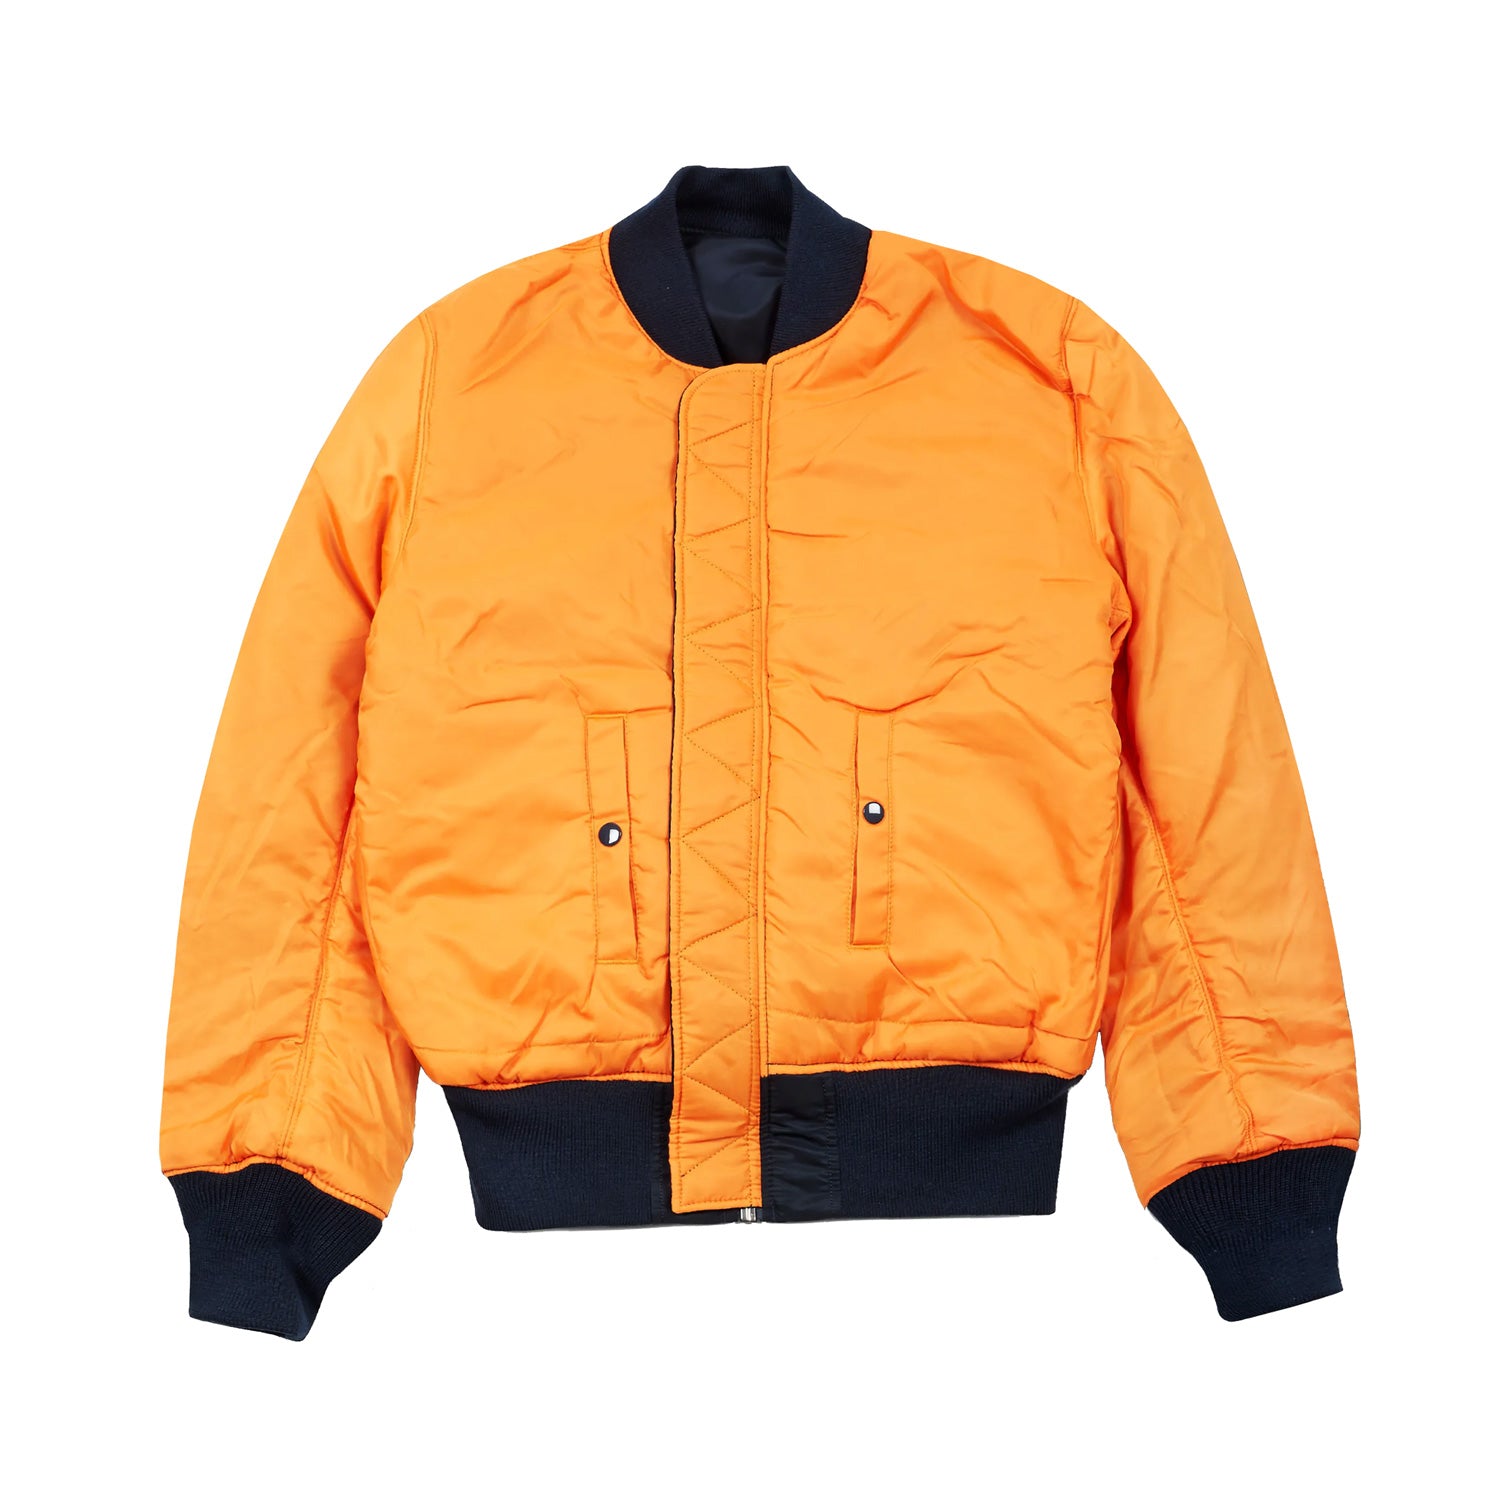 OFF-WHITE Industrial Bomber Jacket Black - Wrong Weather